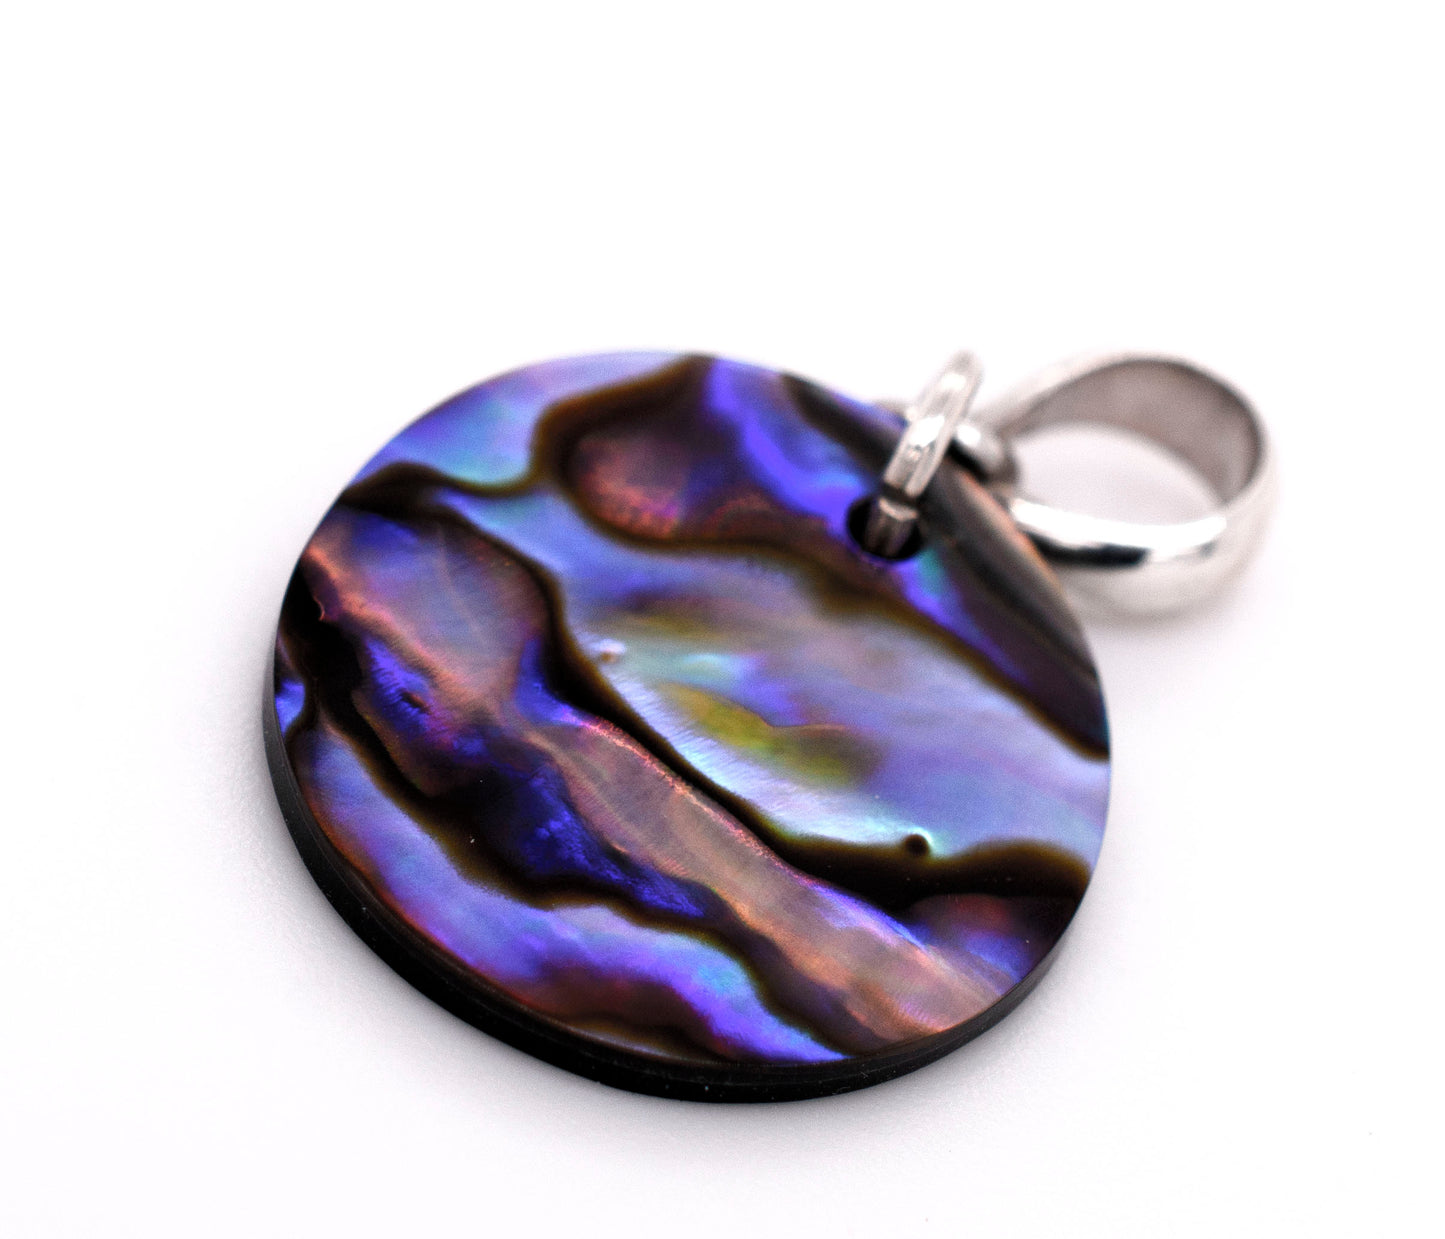 A Super Silver Charming Abalone Pendant displayed on a white surface, showcasing its exquisite beauty and healing properties.